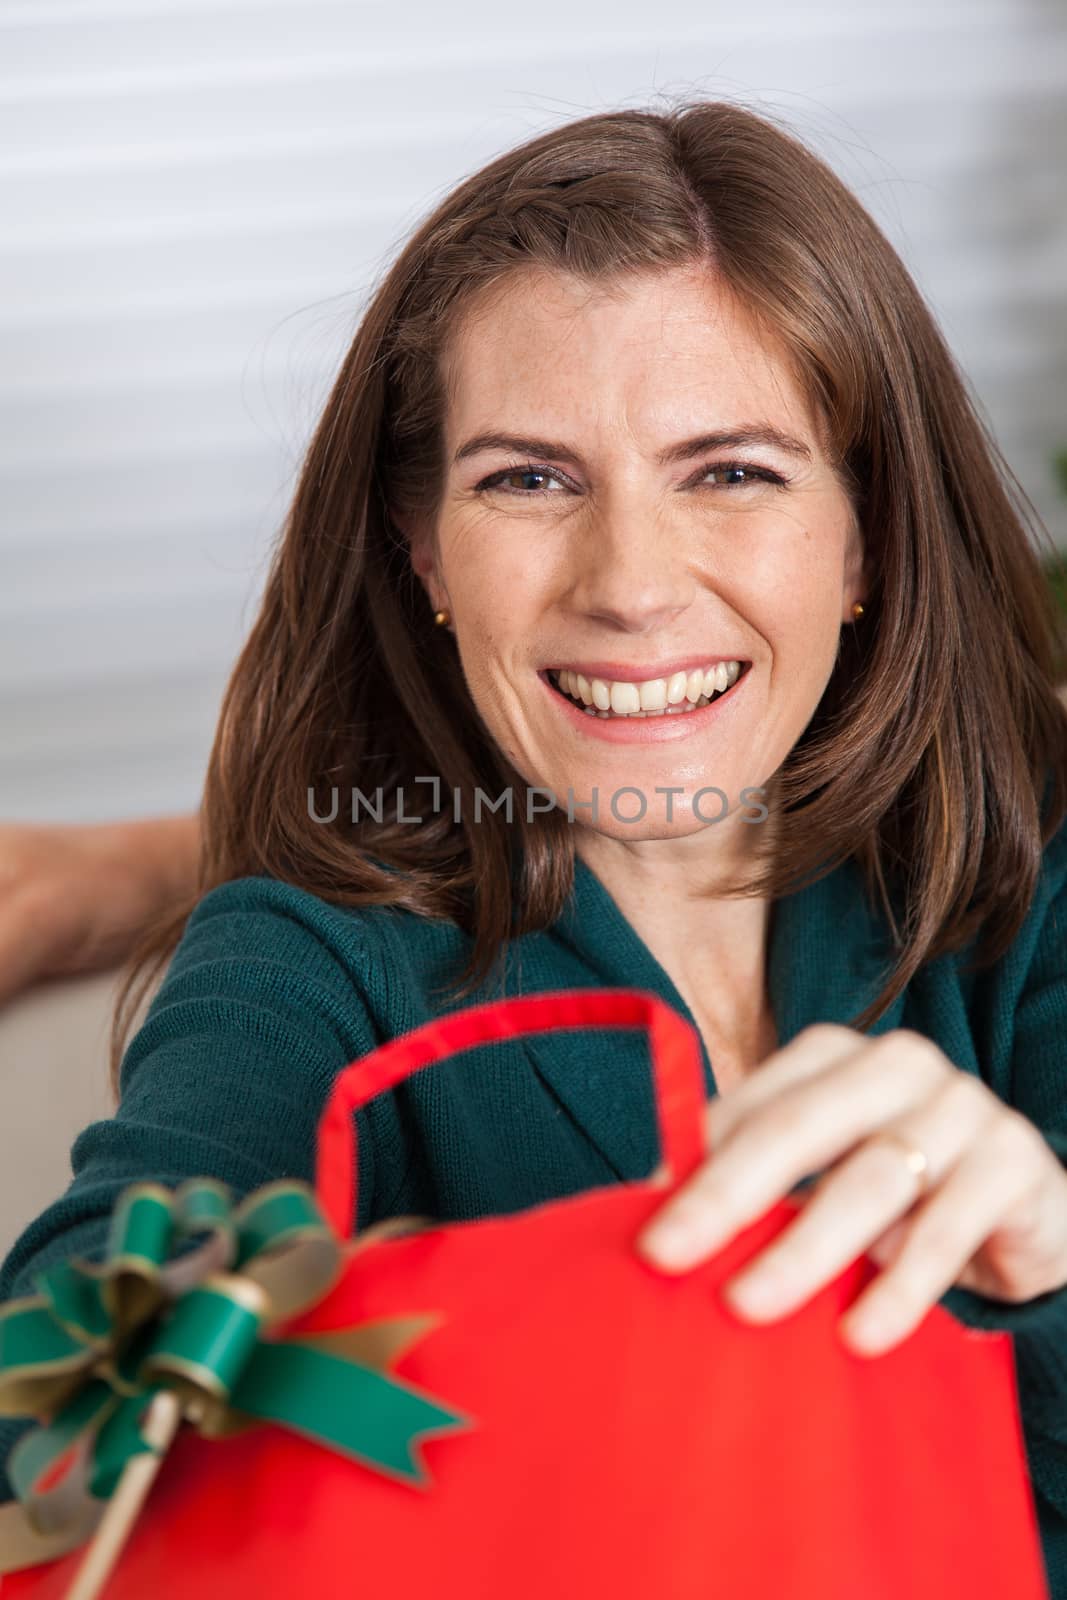 35-40, at, bag, camera, caucasian, celebrating, cheerful, christmas, cute, enjoy, female, festive, festivity, gift, green, happy, holding, holidays, horizontal, joyful, looking, merry, model, old, one, open, opening, person, pleasure, present, pretty, property, red, release, smile, smiling, white, woman, years, wife